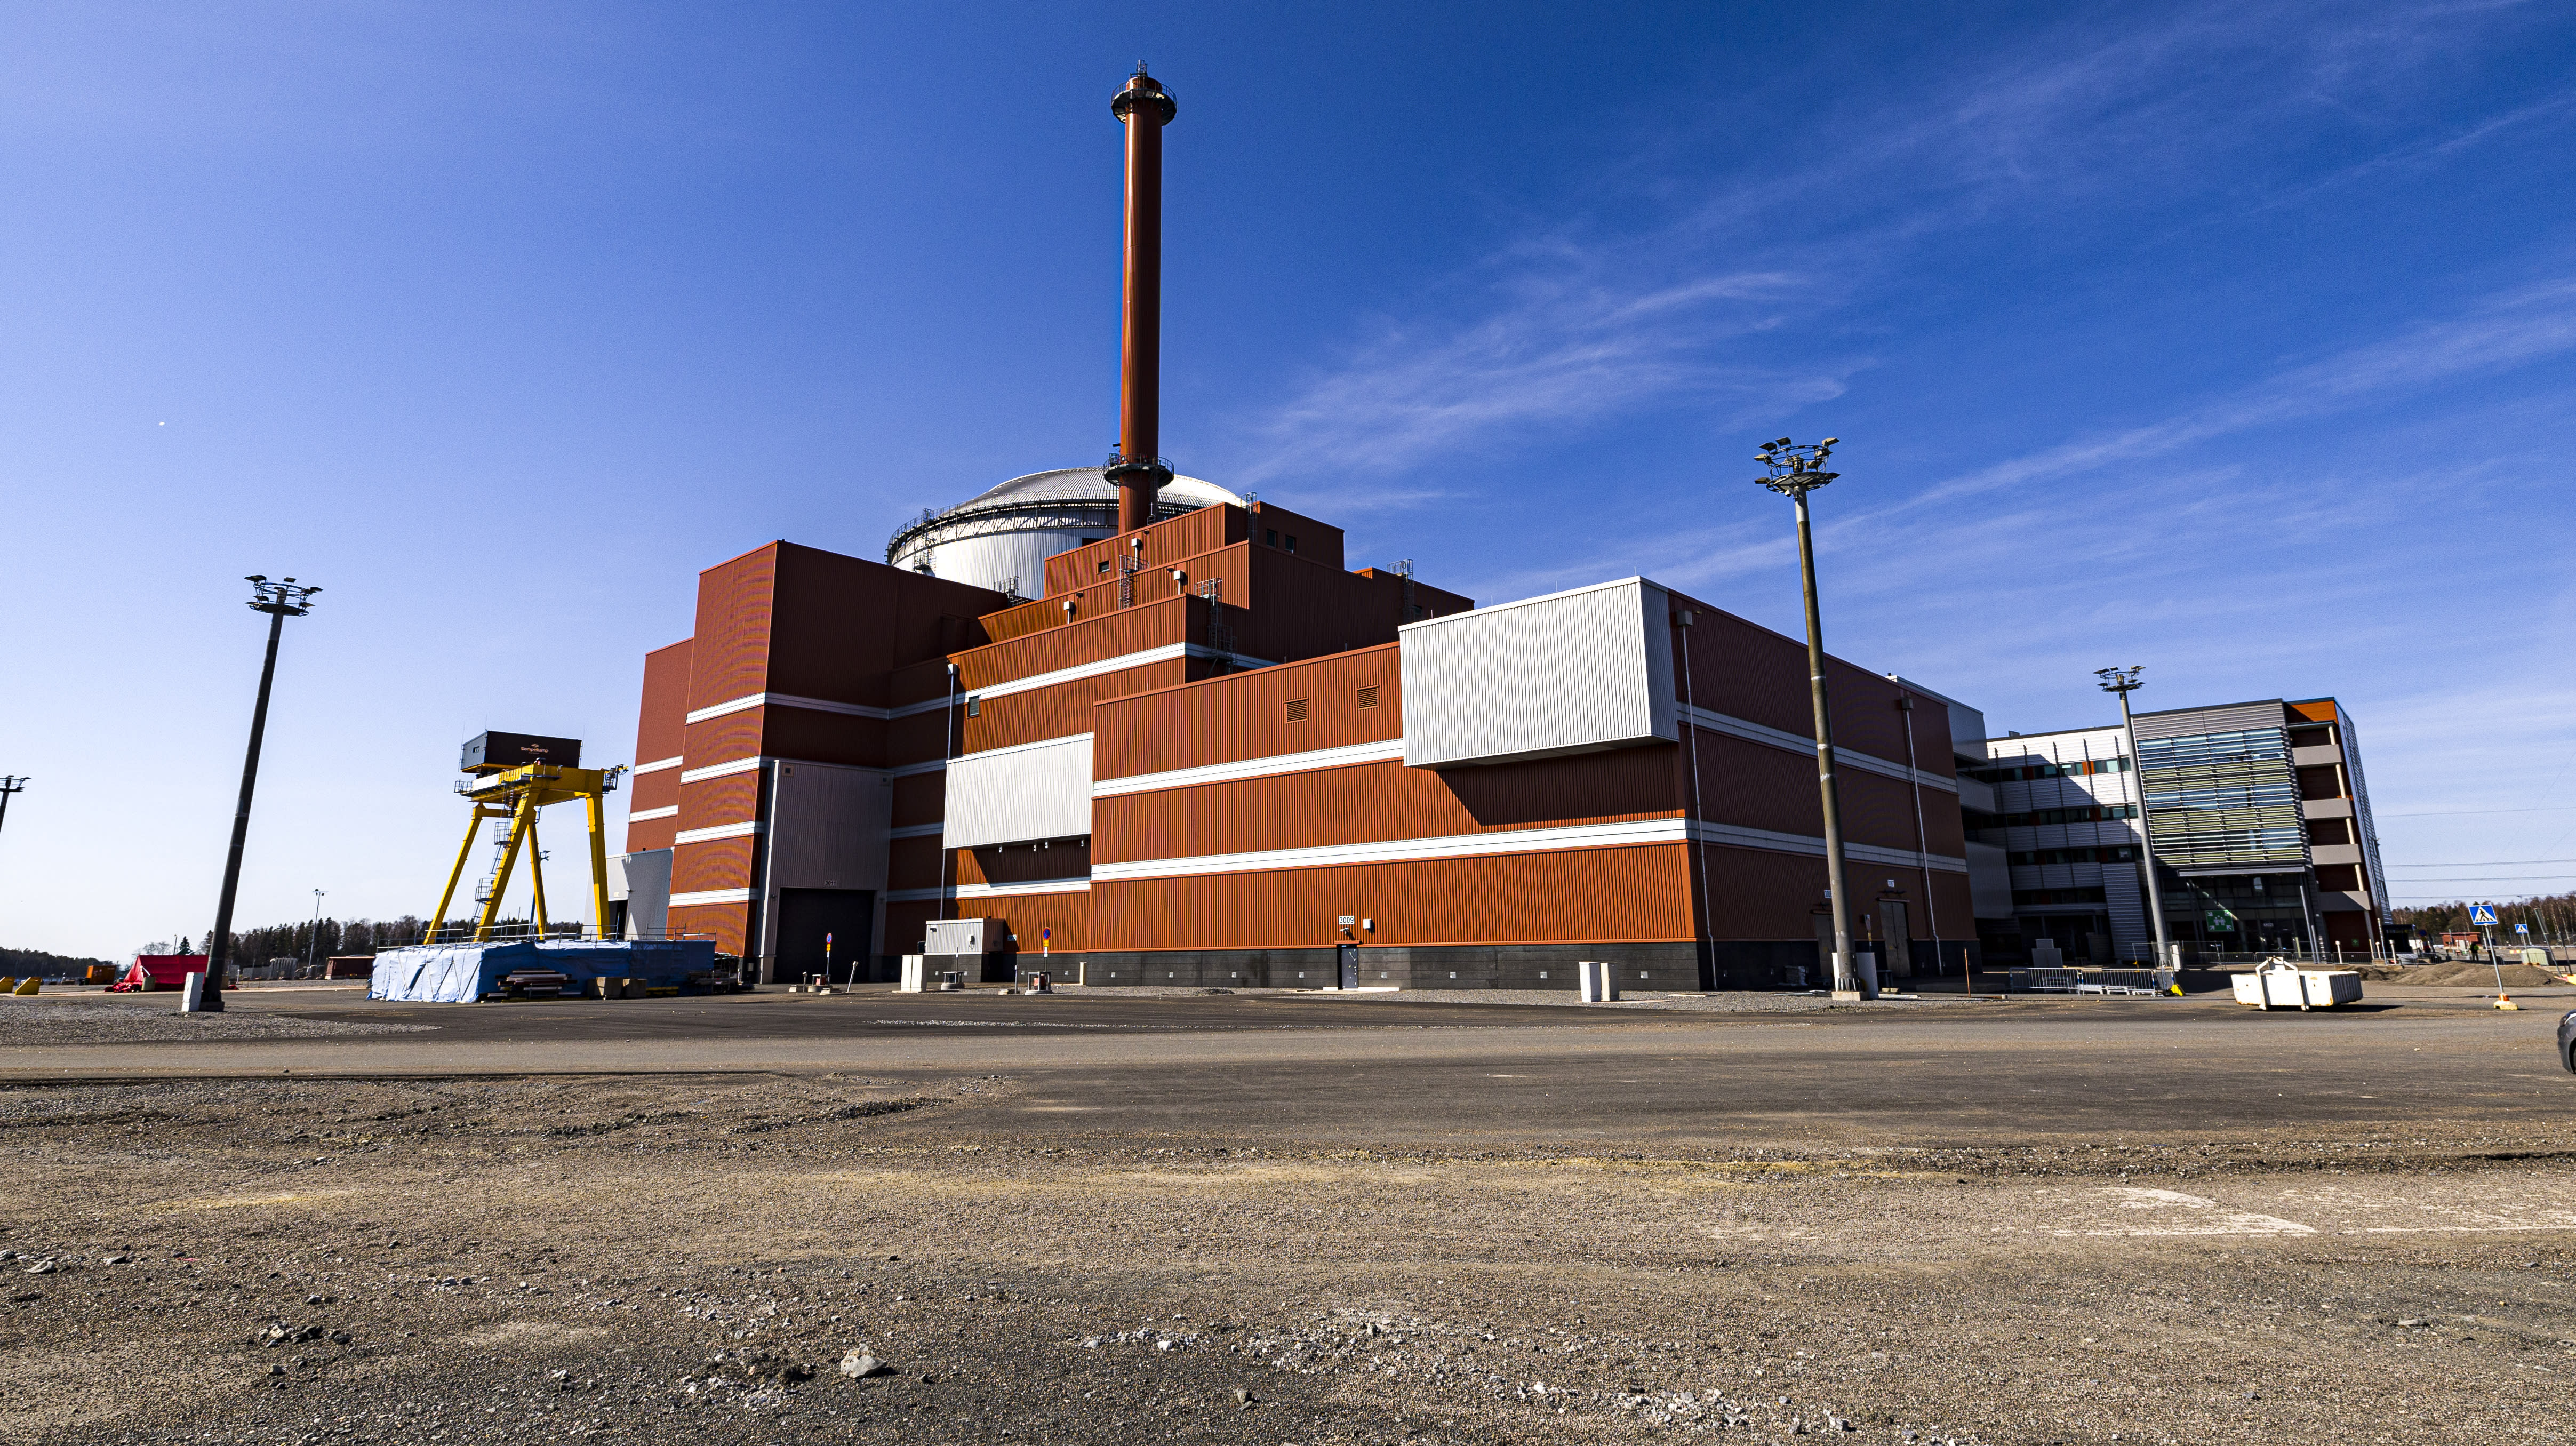 Finland’s OL3 nuclear reactor offline until Tuesday